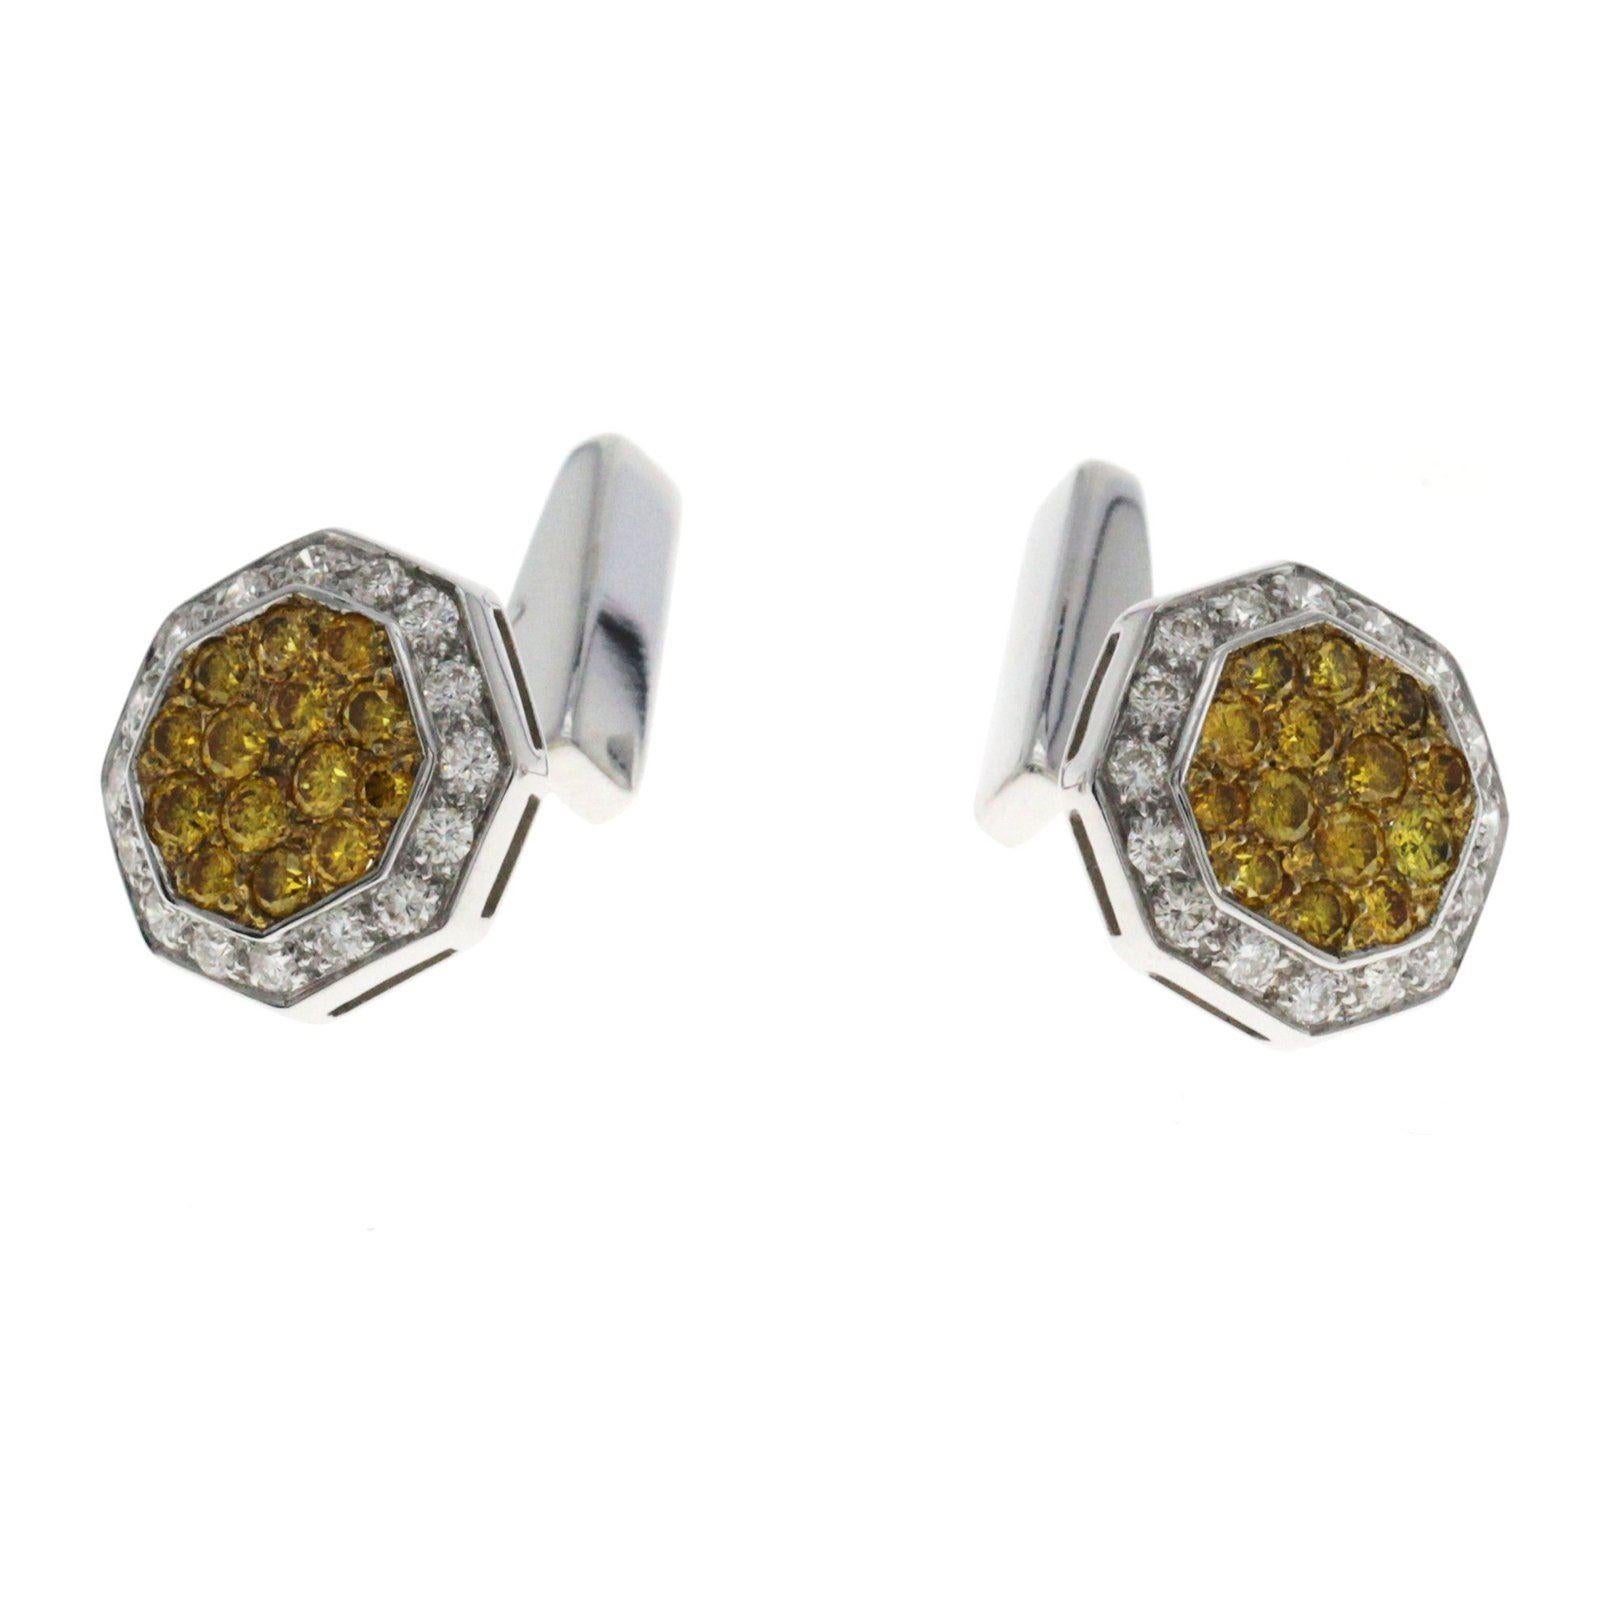 Height: 13.5 mm
Width: 24.5 mm
Metal:18K White Gold
Hallmarks: 750
Total Weight: 9.9 Grams
Stone Type: 1.24 CT Natural I2 Yellow Diamonds & 0.44 CT I1 Diamonds
Condition: New 
Estimated Retail Price: $7800
Stock Number: 190-00340